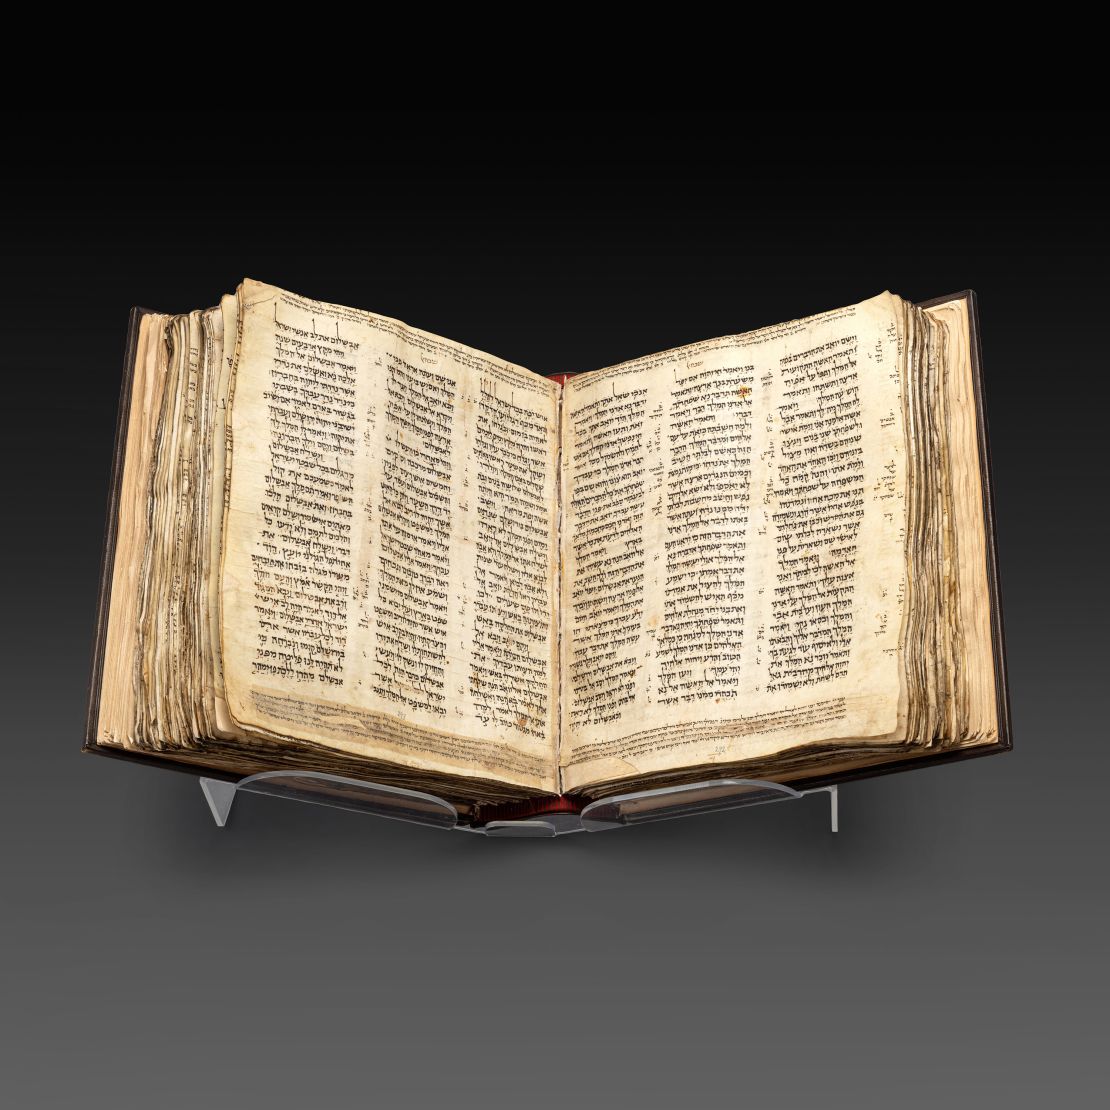 The ancient bible will be on show in London, Jerusalem and the US, before going up for sale.